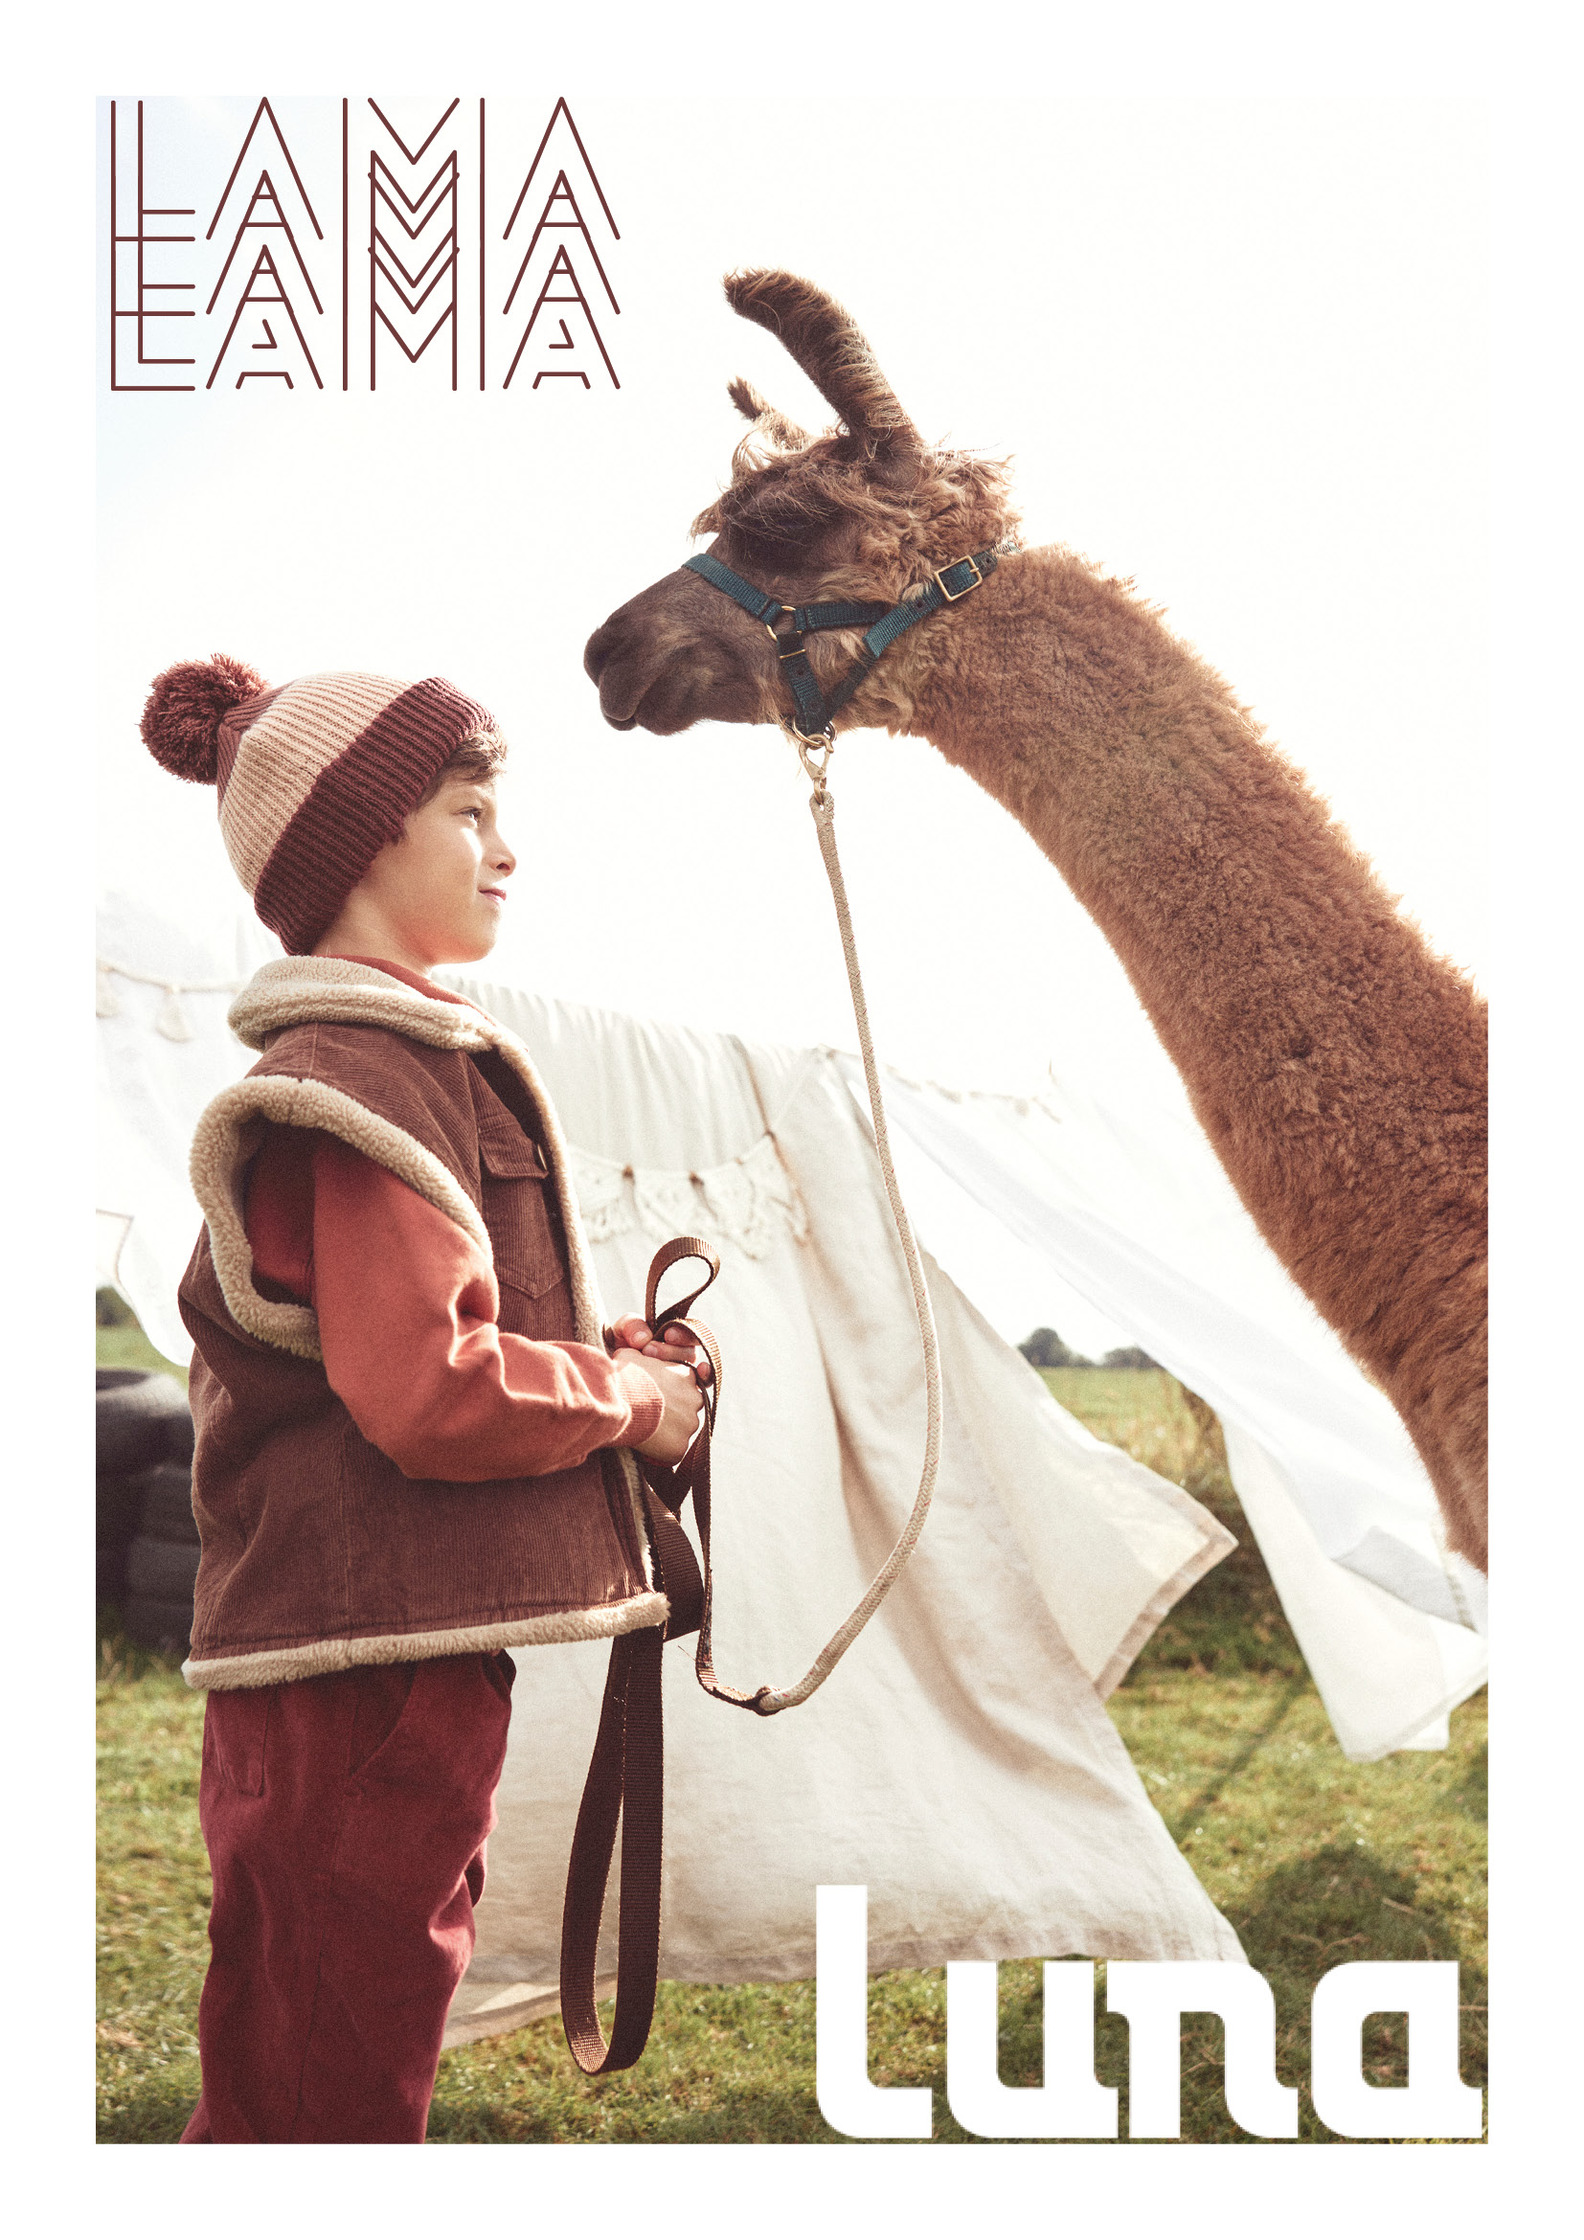 a young boy is standing next to a llama